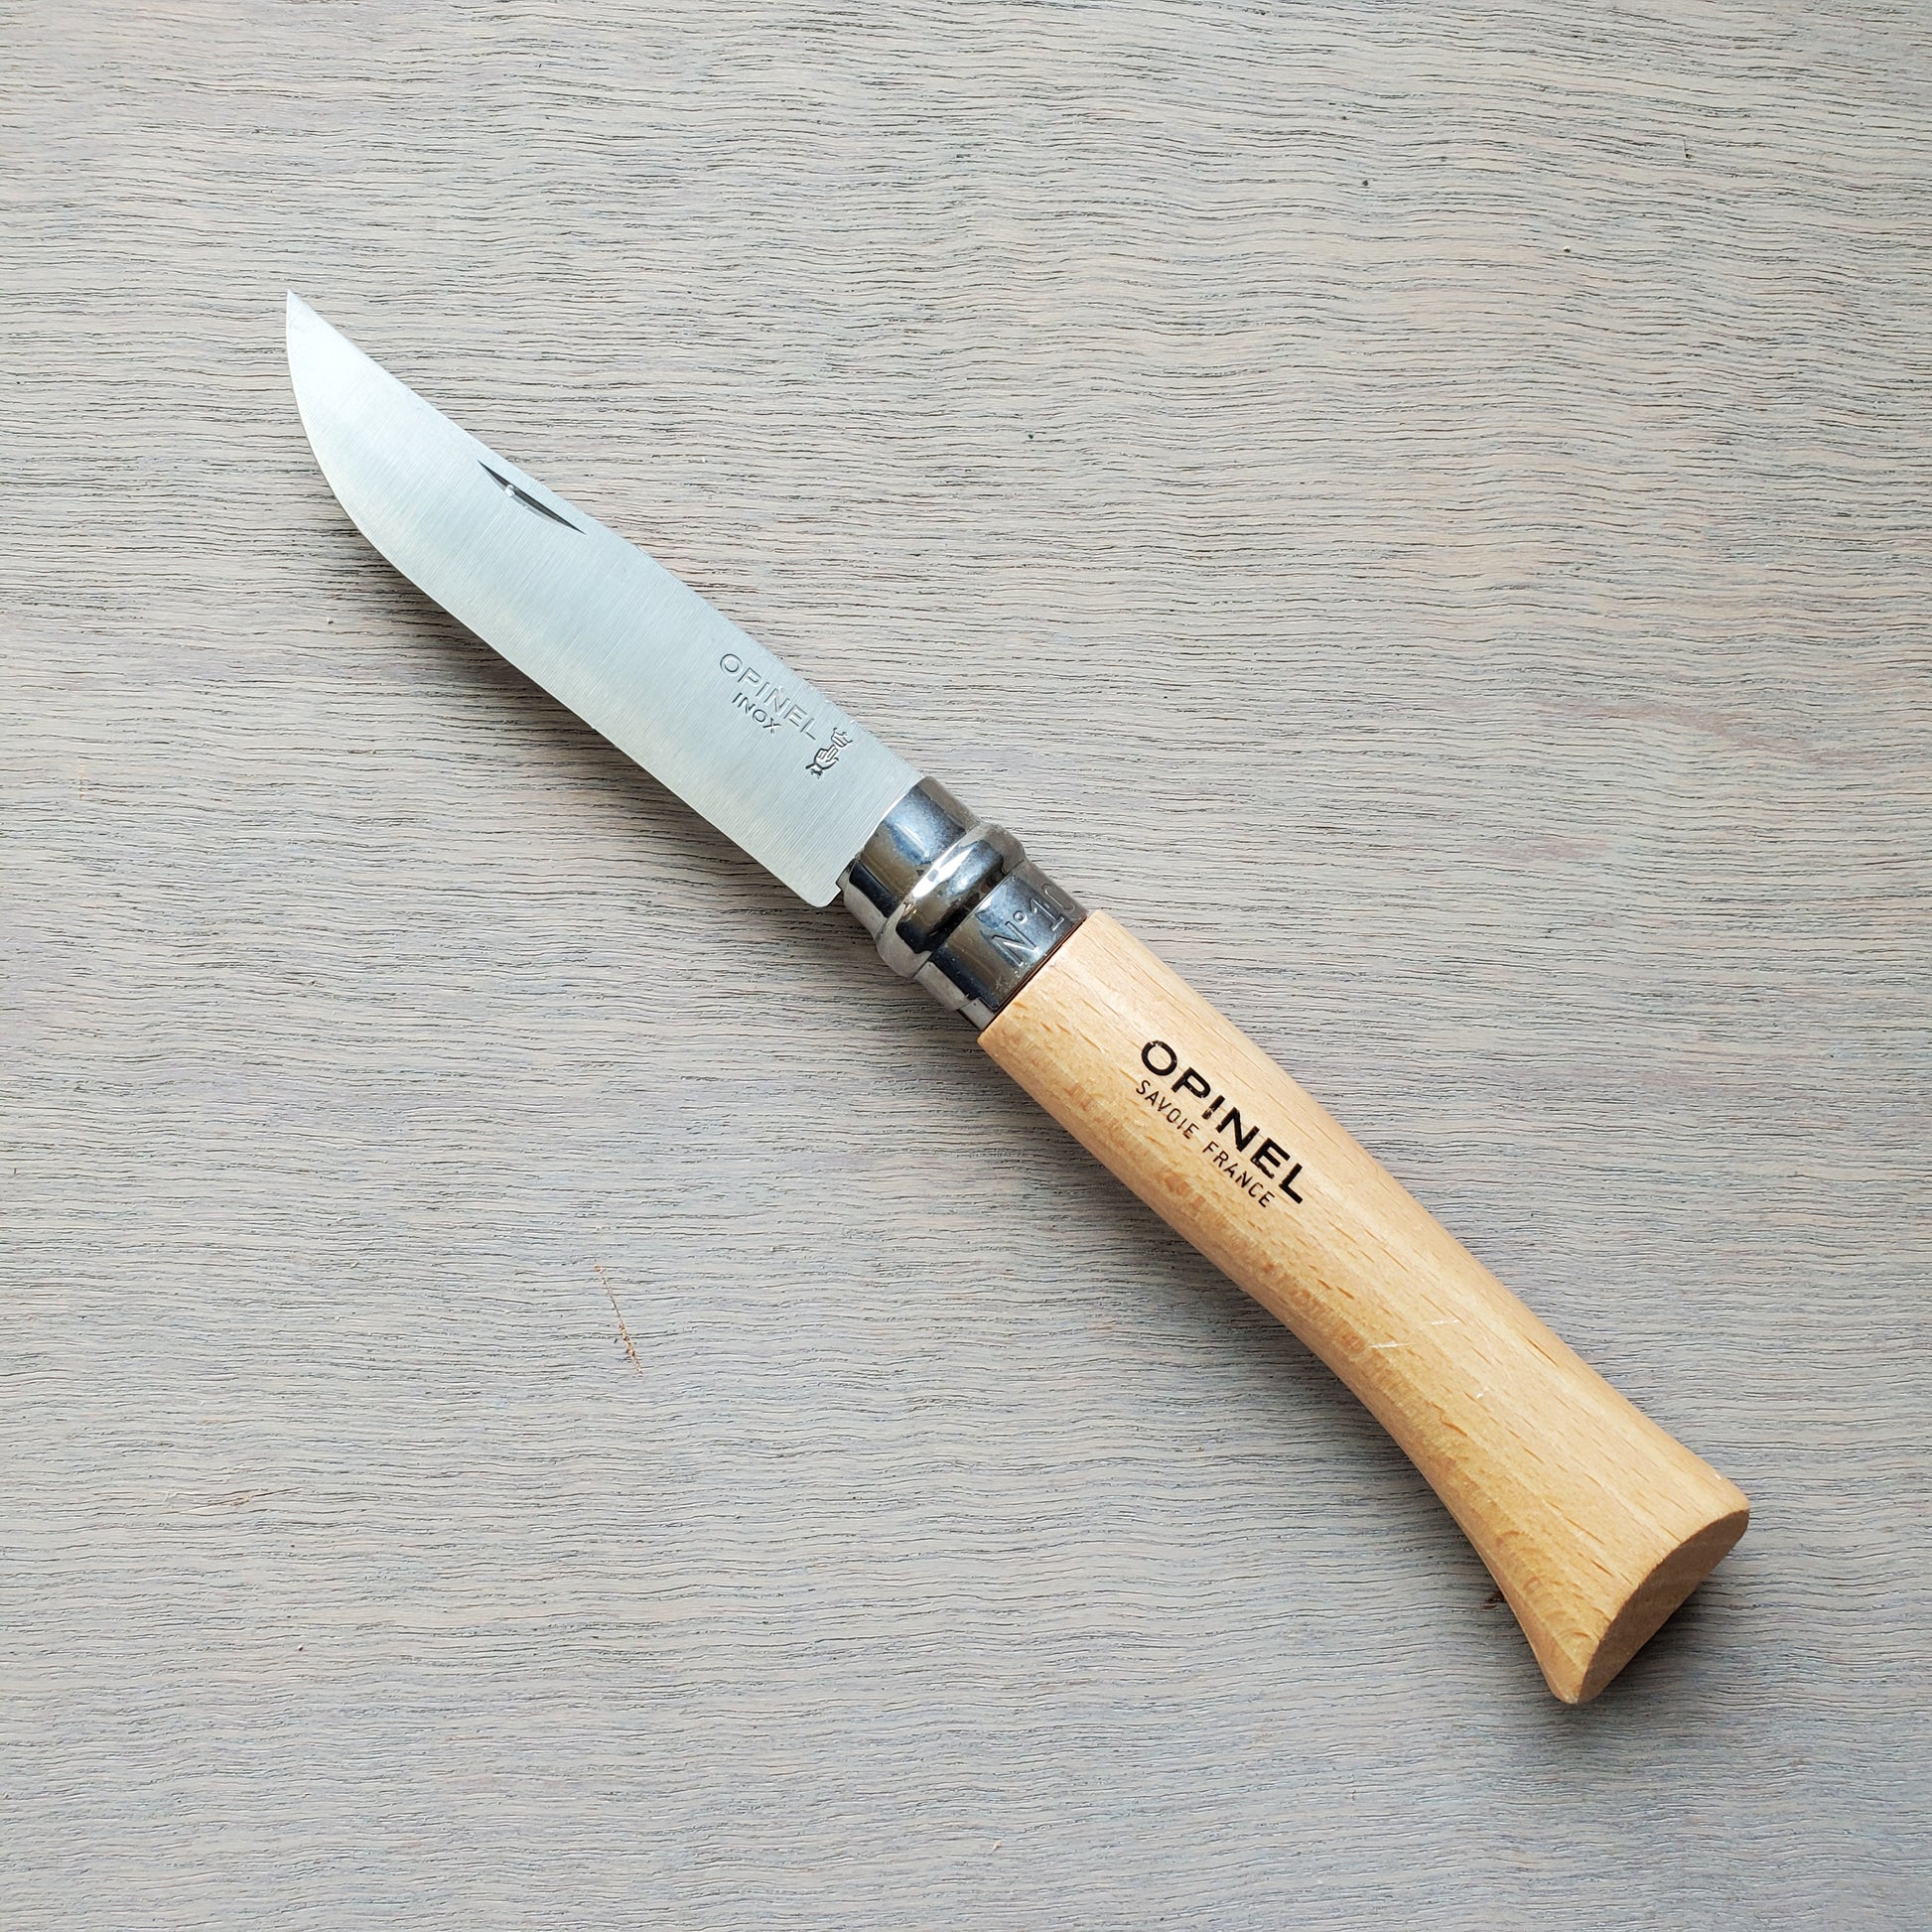 Opinel No. 8 - Overview and Review 